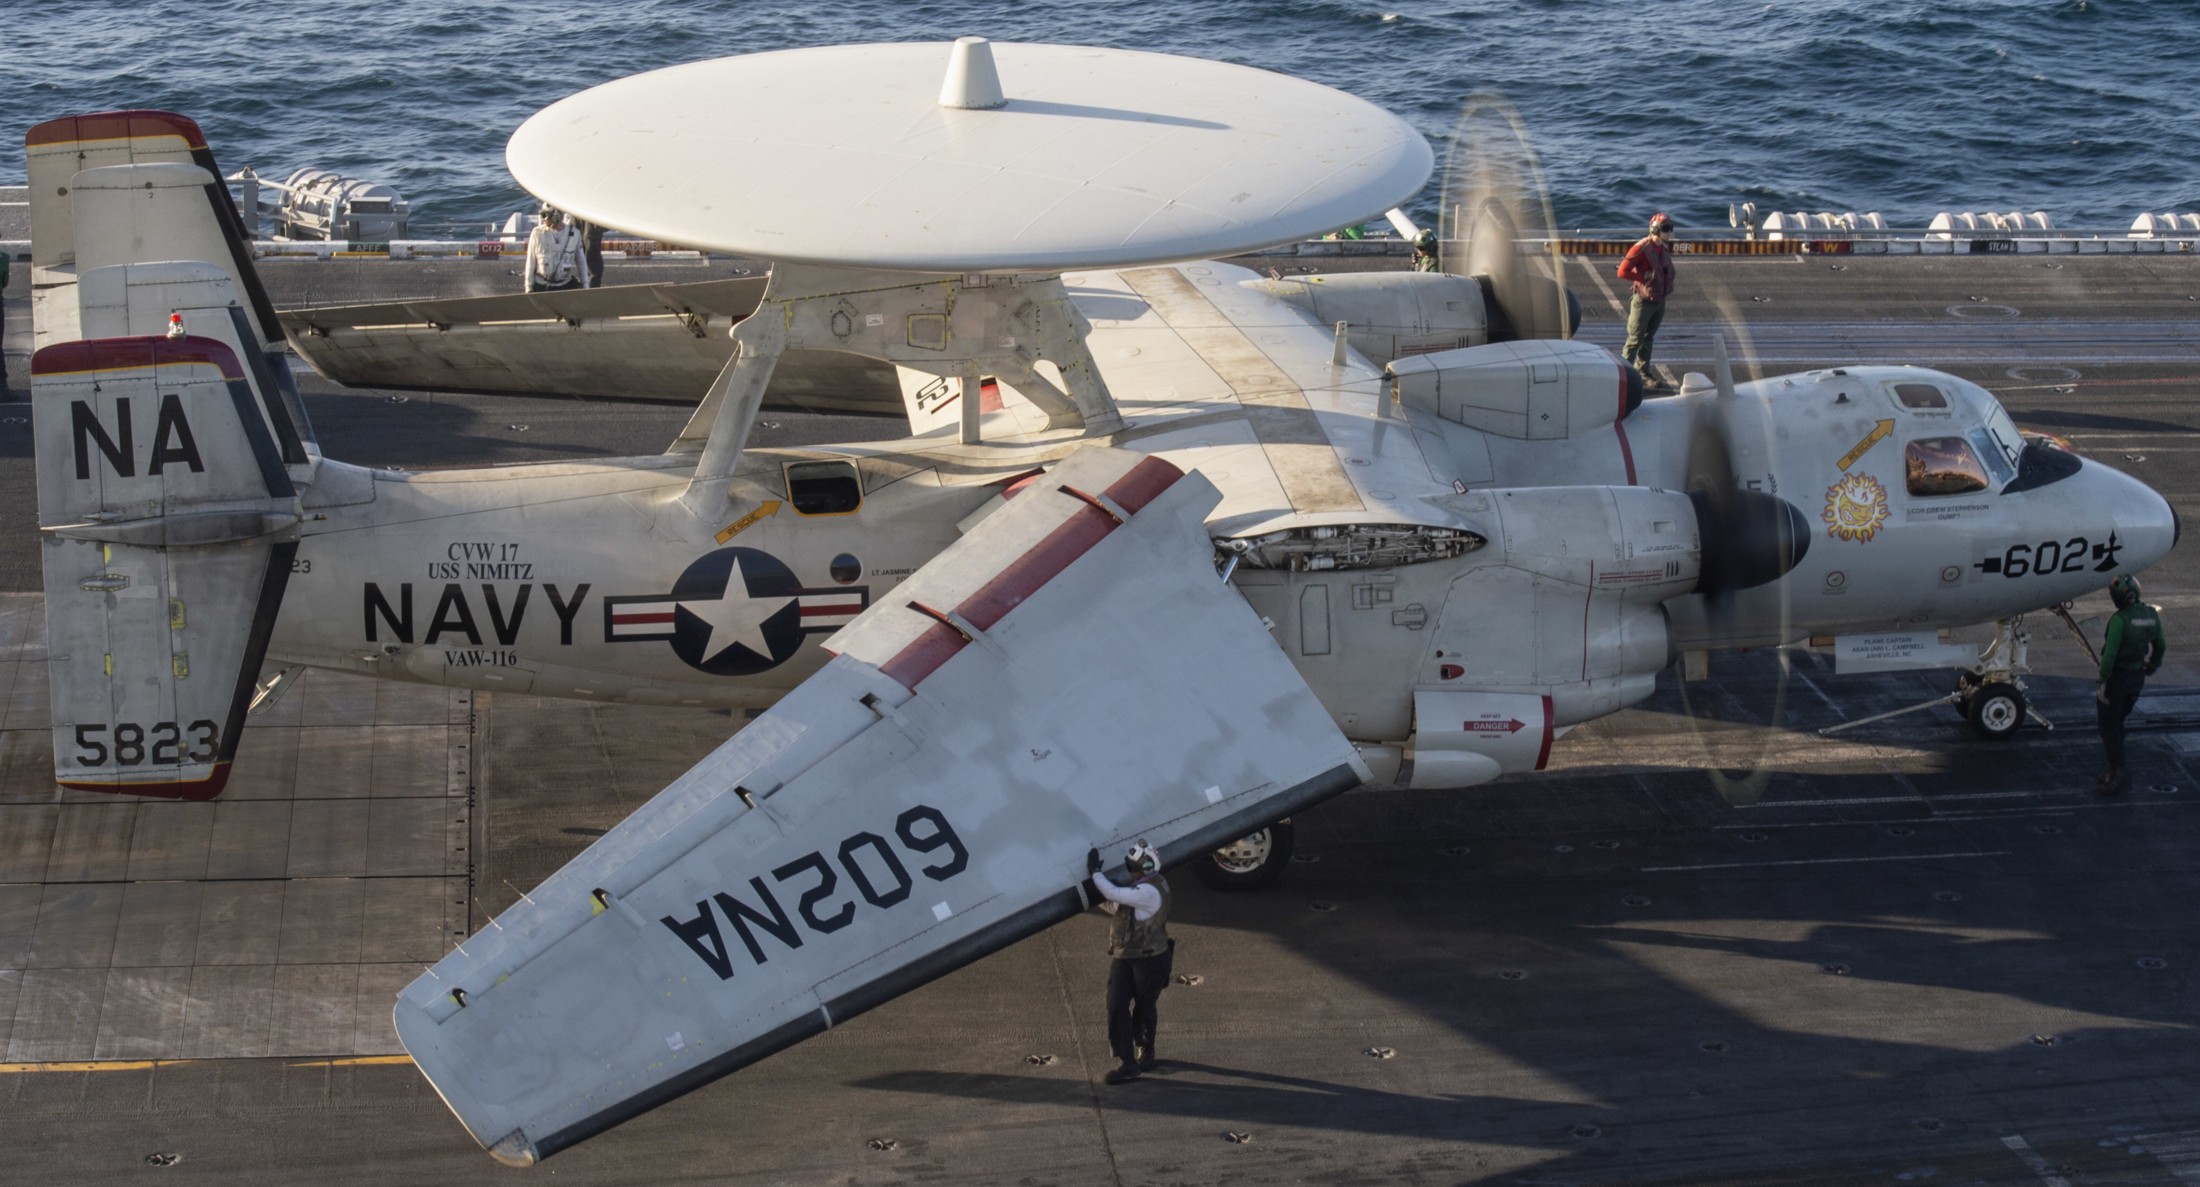 vaw-116 sun kings airborne command control squadron carrier early warning cvw-17 uss nimitz cvn-68 104